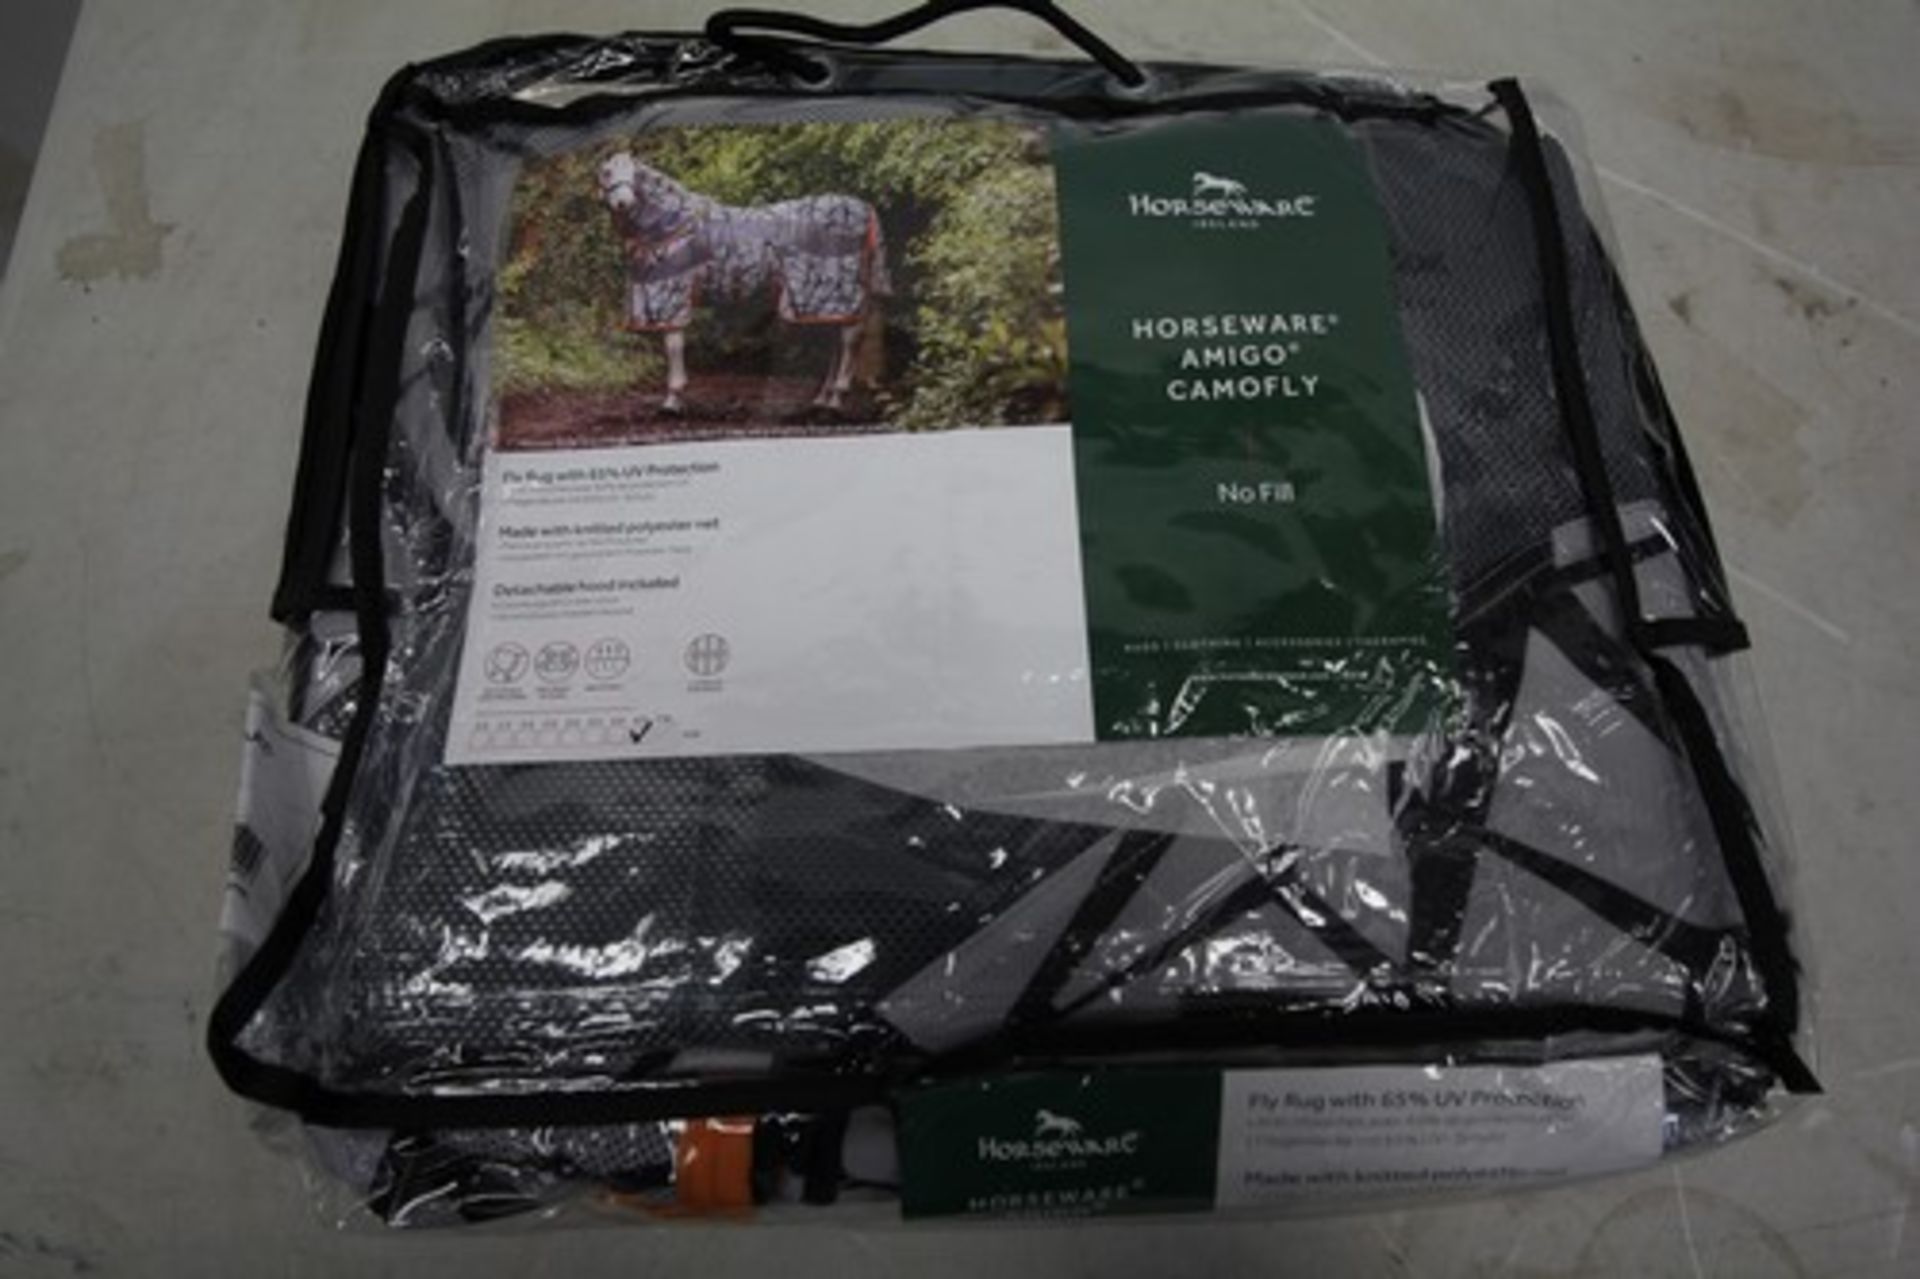 1 x Horseware Amigo Camo Fly no fill fly rug with detachable hood, size 6'9" - New in pack (GS17)